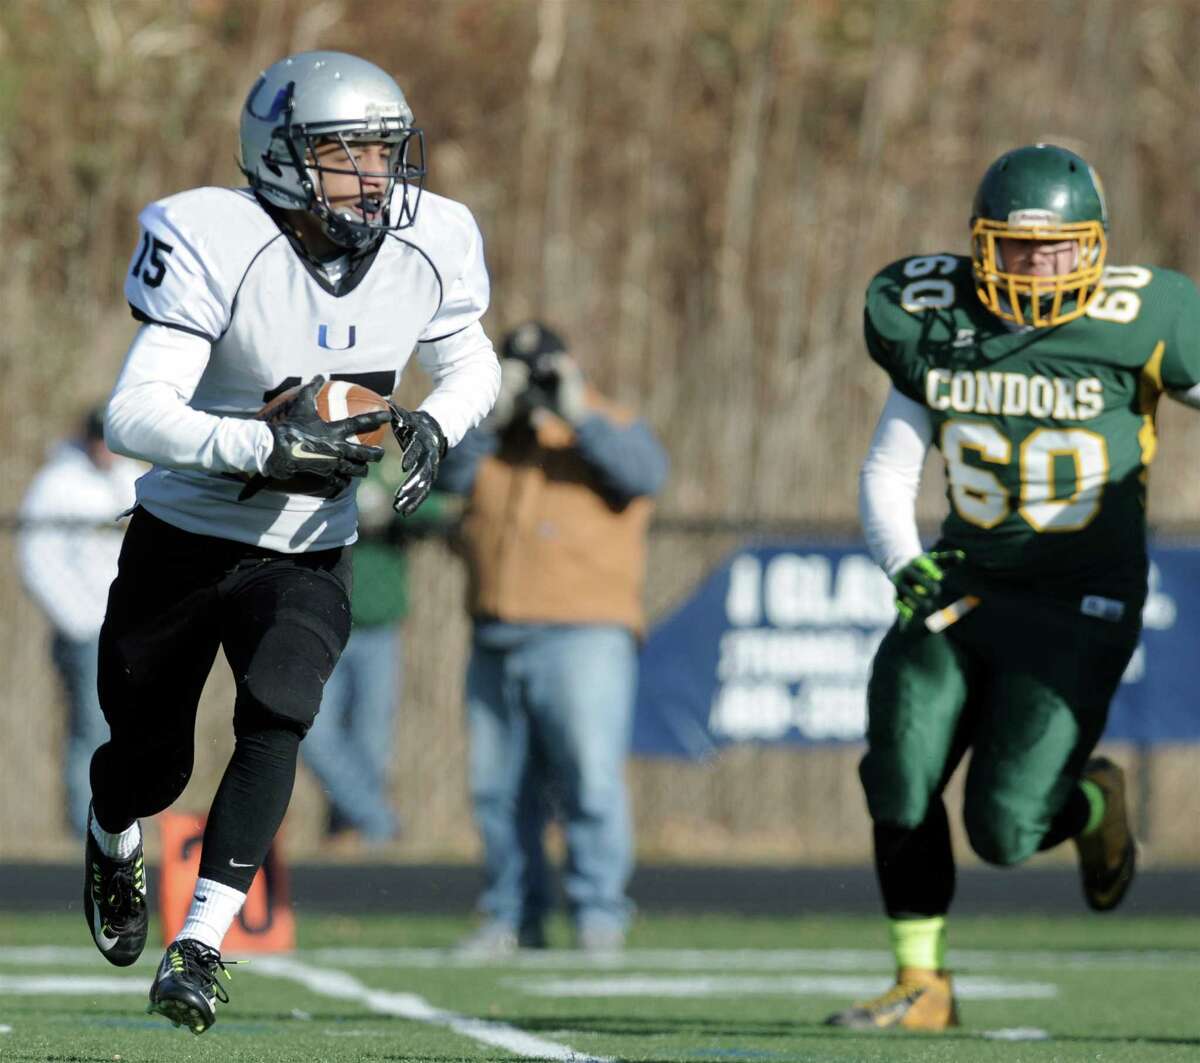 ATI United's Darius Smith (15) is pursued by O'Brien Tech's Jose Lopez (60) during the boys football game between O'Brien Tech and Abbott Tech/Immaculate United on Saturday, November 22, 2014, played at Immaculate High School, in Danbury, Conn.